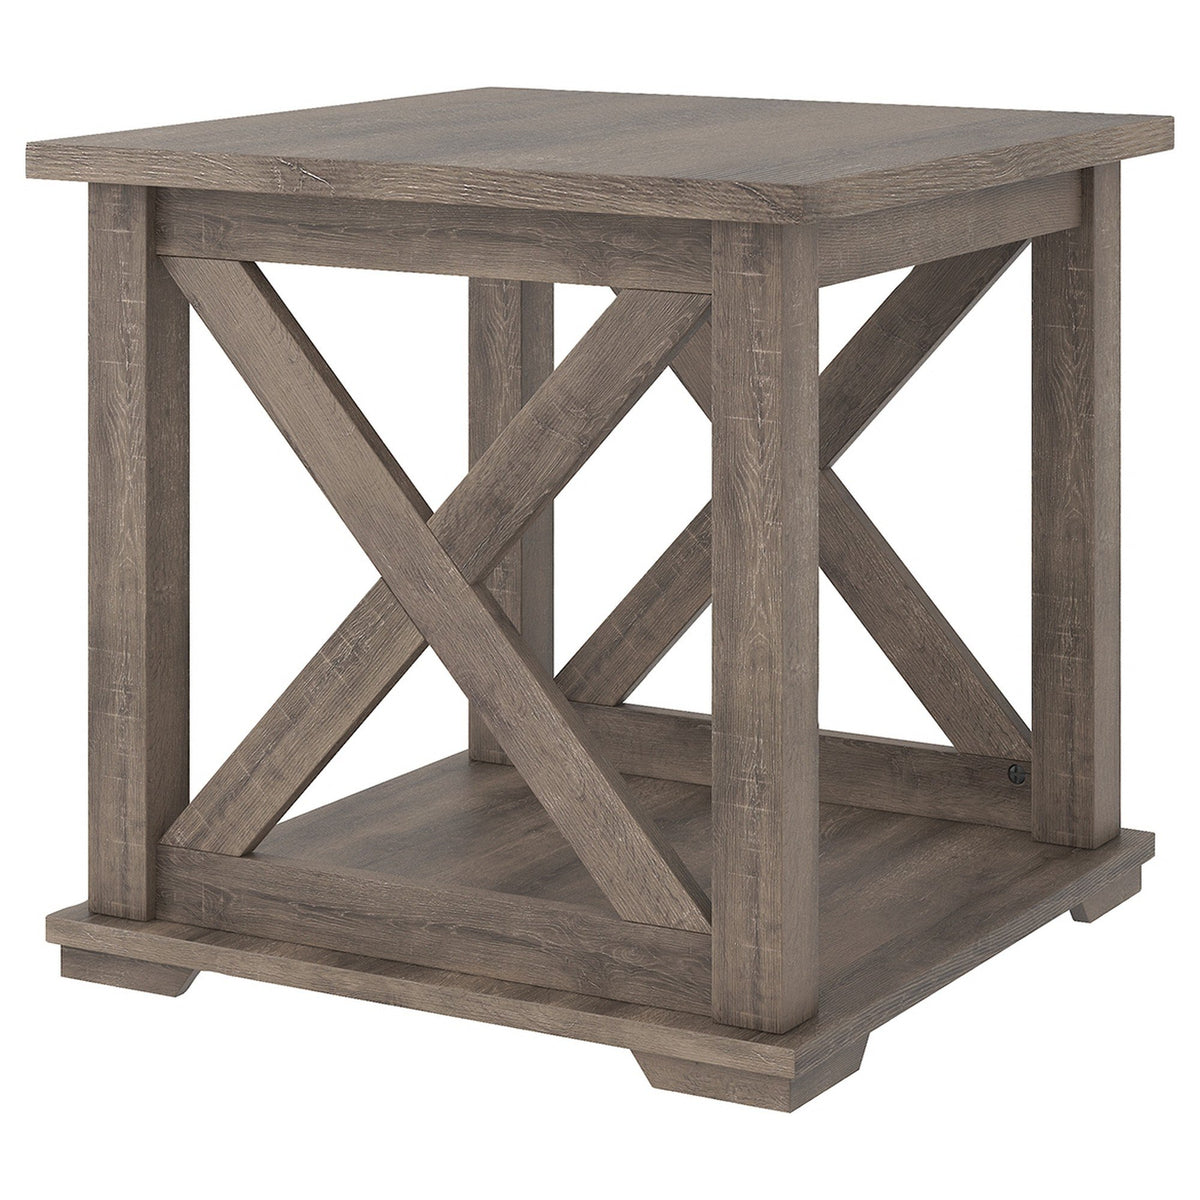 Wooden Square End Table with Bottom Shelf and Cross Design Sides, Brown - BM226540